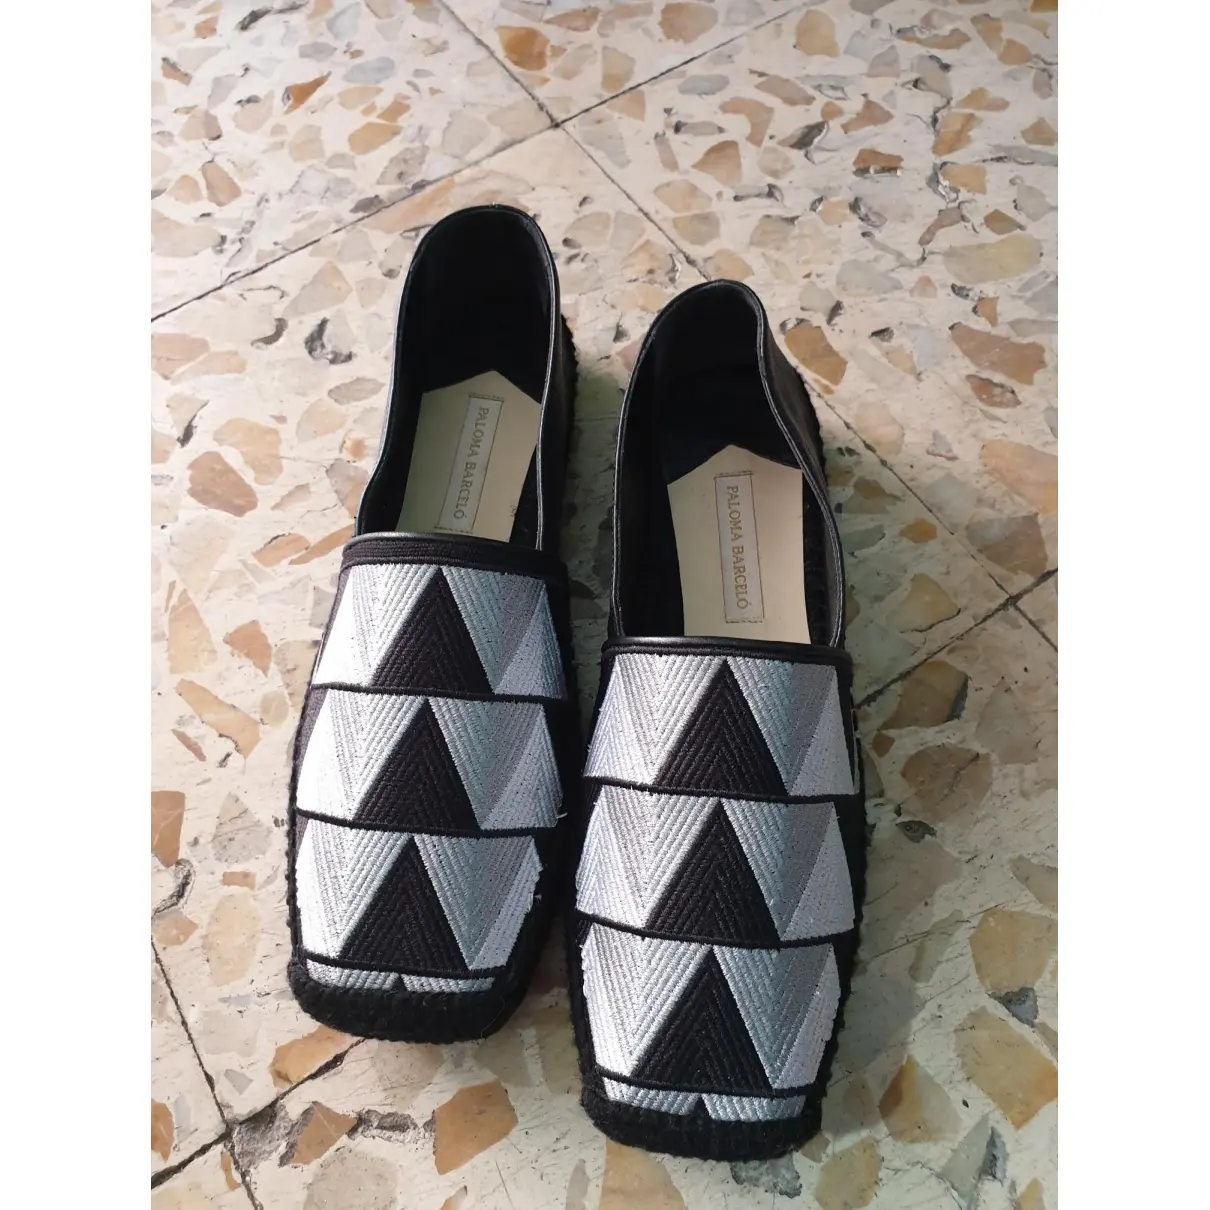 Paloma Barcelo Leather espadrilles for sale